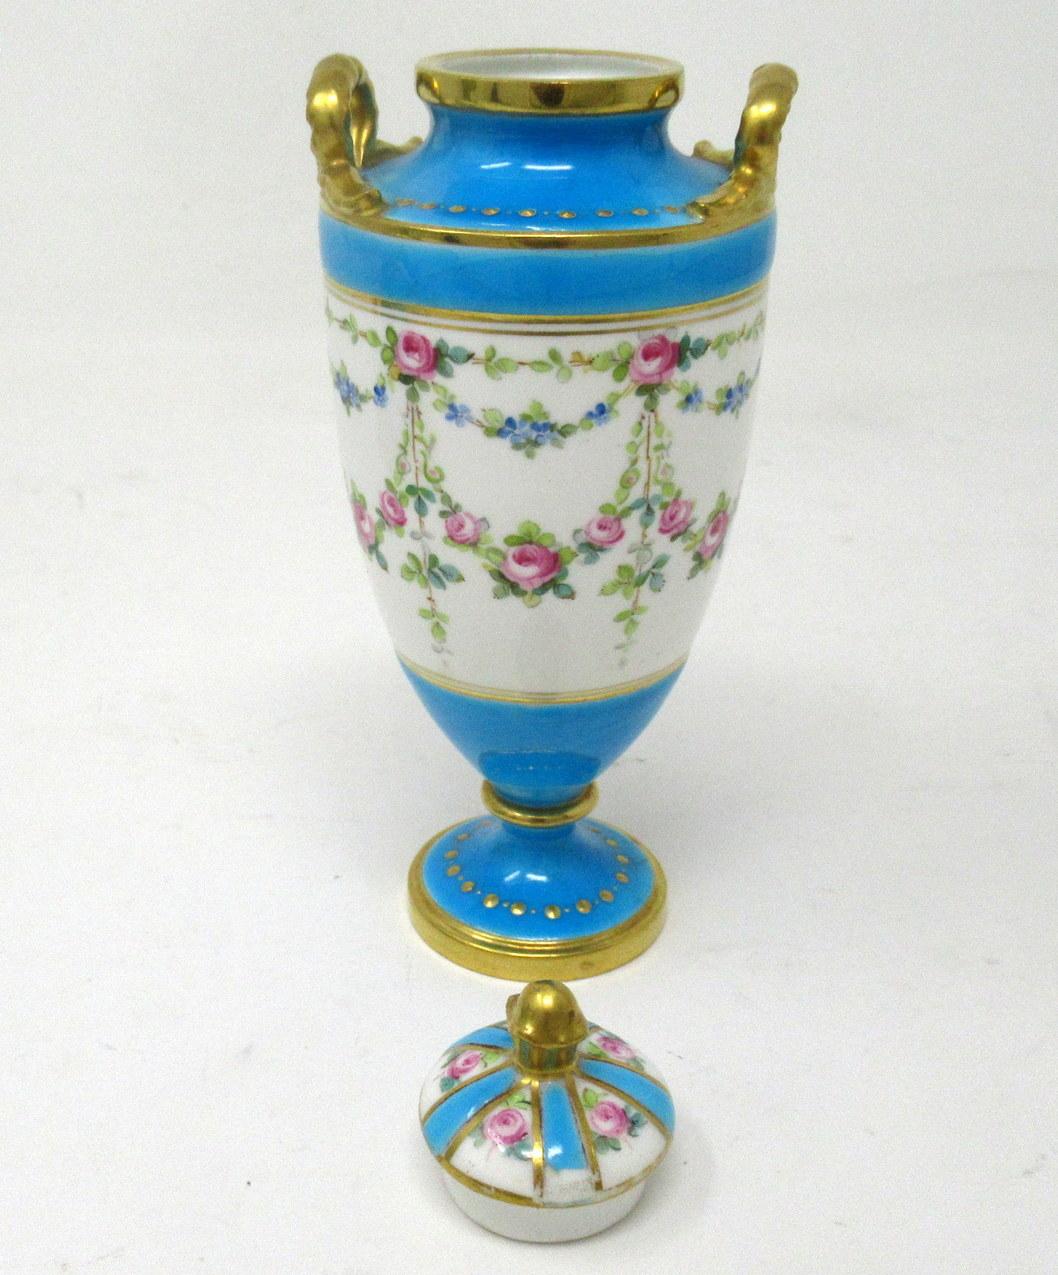 Antique Minton Staffordshire Porcelain Ewer Urn Vase Centerpiece Roses Turquoise In Good Condition For Sale In Dublin, Ireland